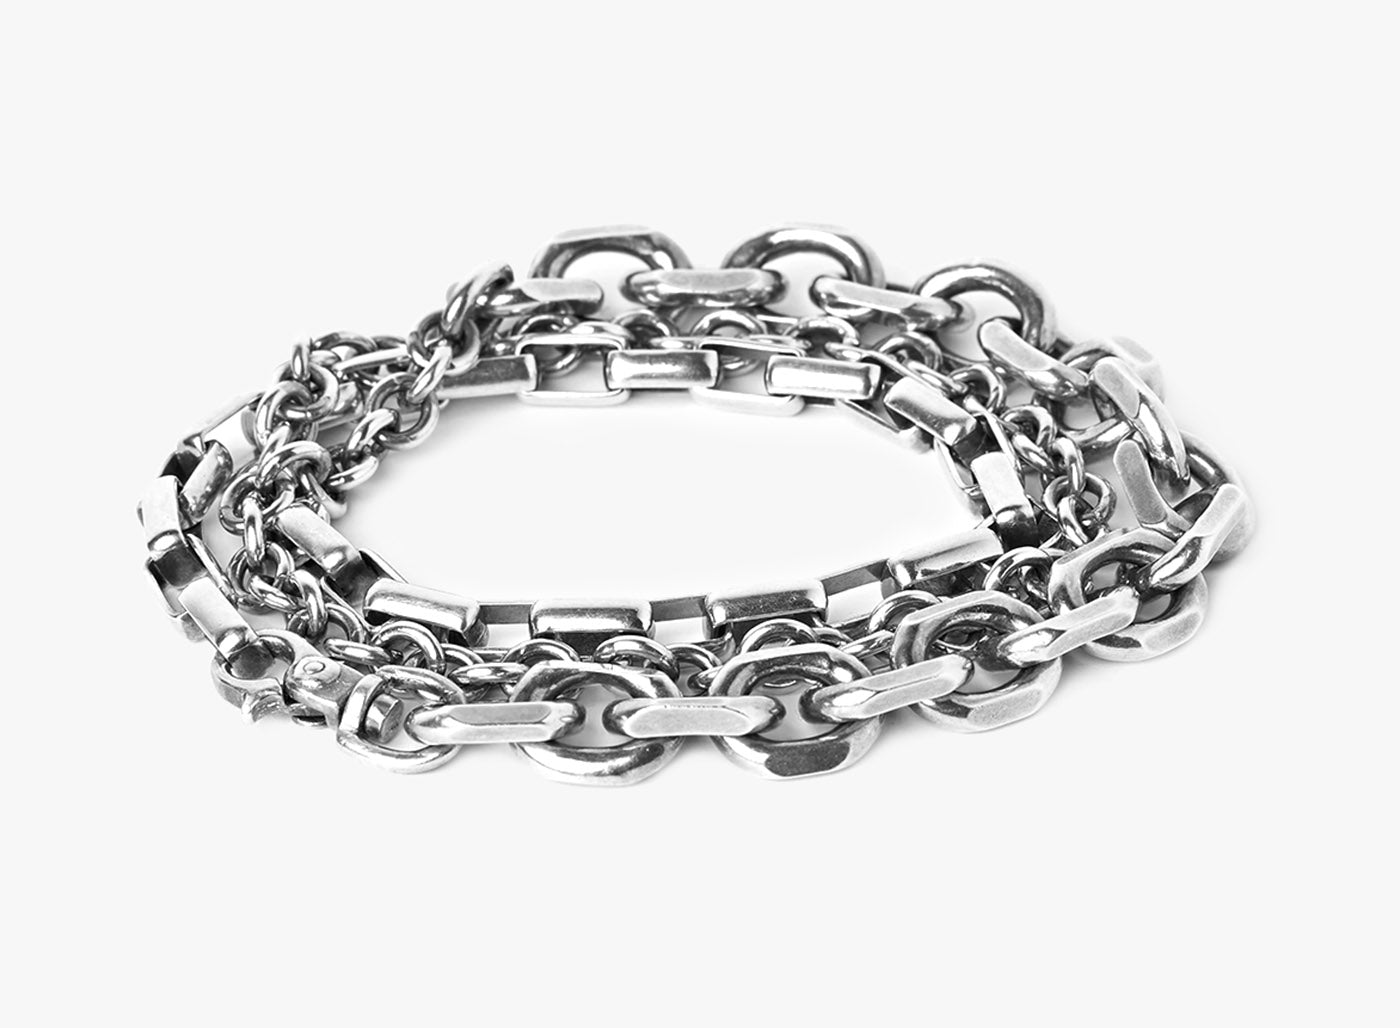 MIXED CHAIN STERLING SILVER BRACELET 363: this adjustable triple-wrap bracelet features varying sterling chains that can be worn as a necklace